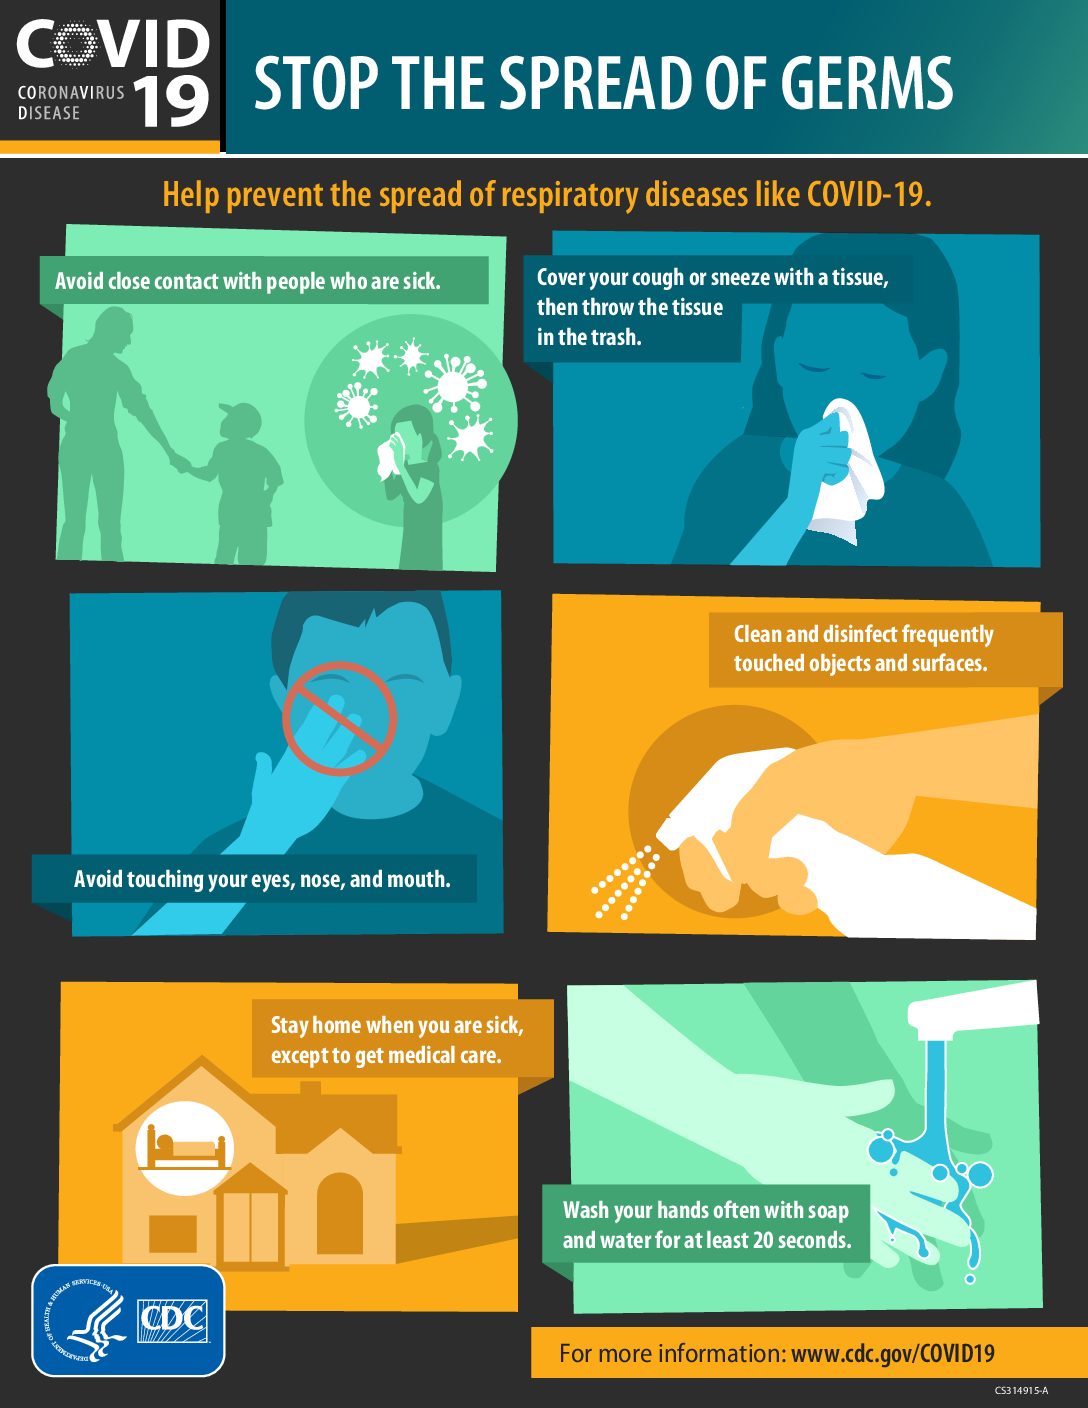 Stop the spread of germs Coronavirus disease poster from the CDC The